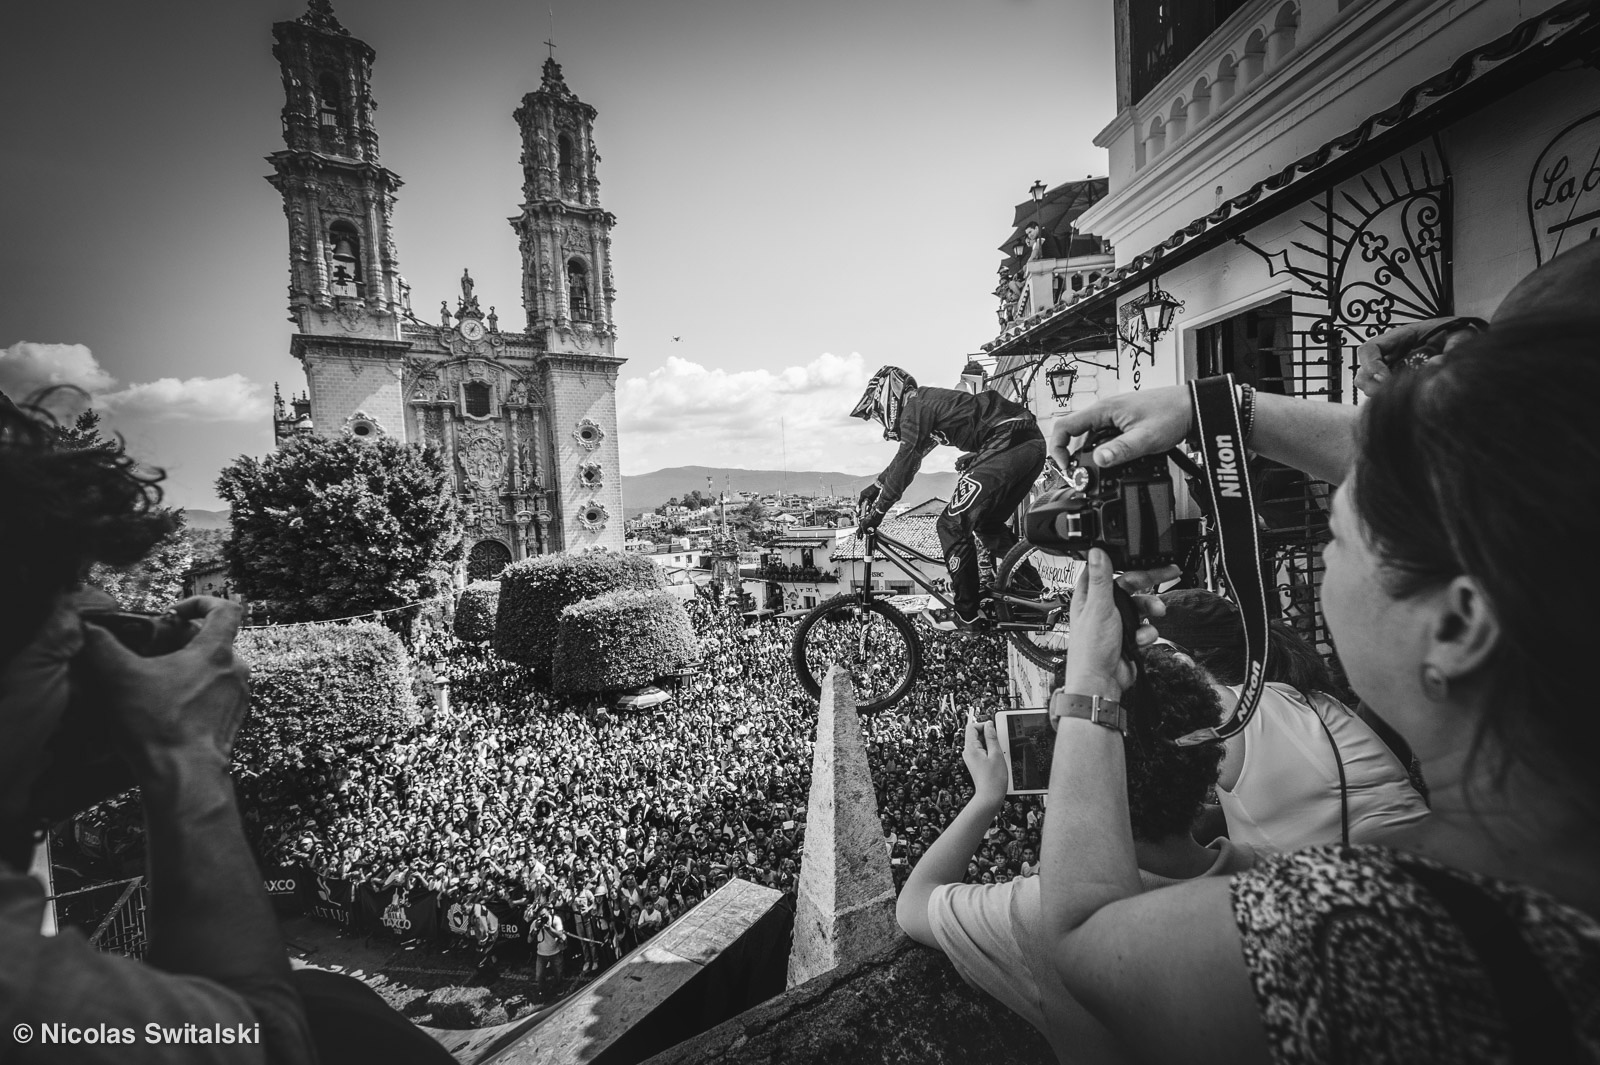 Mitch Ropelato dropping into the Taxco plaza with a "few" eyes on him!